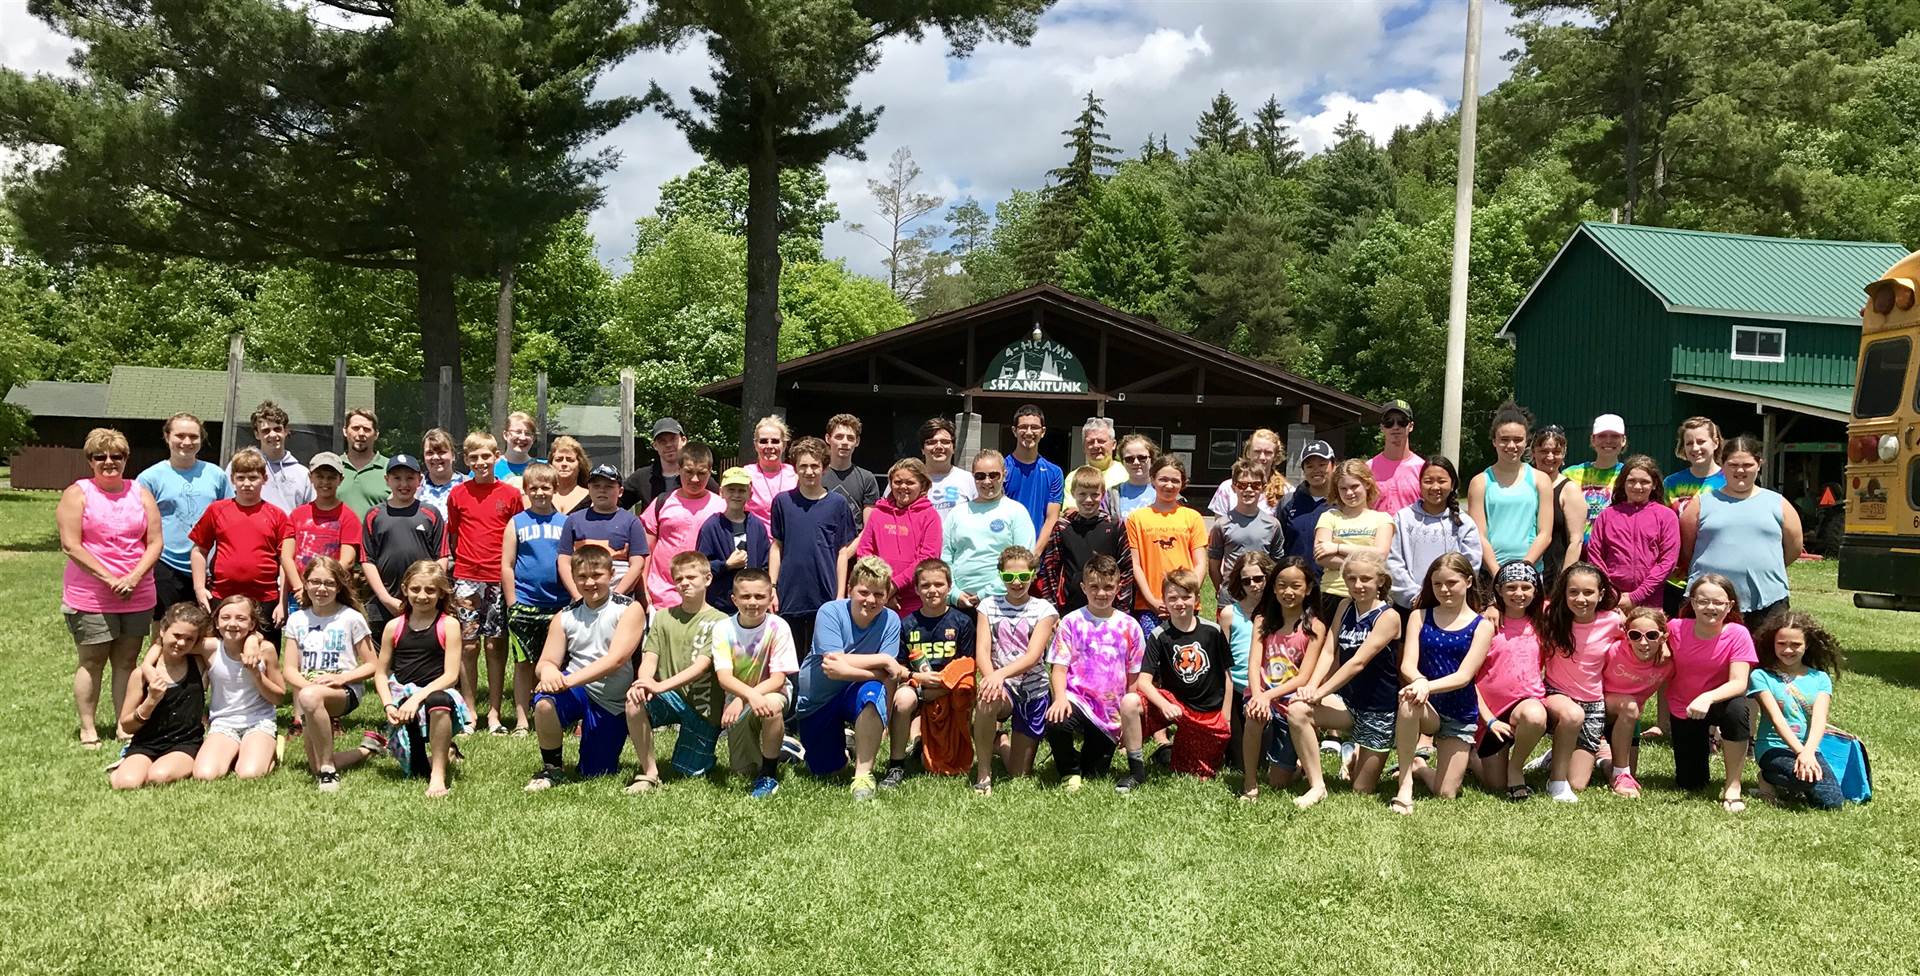 Group photo from the 5th grade campout at Camp Shankitunk!